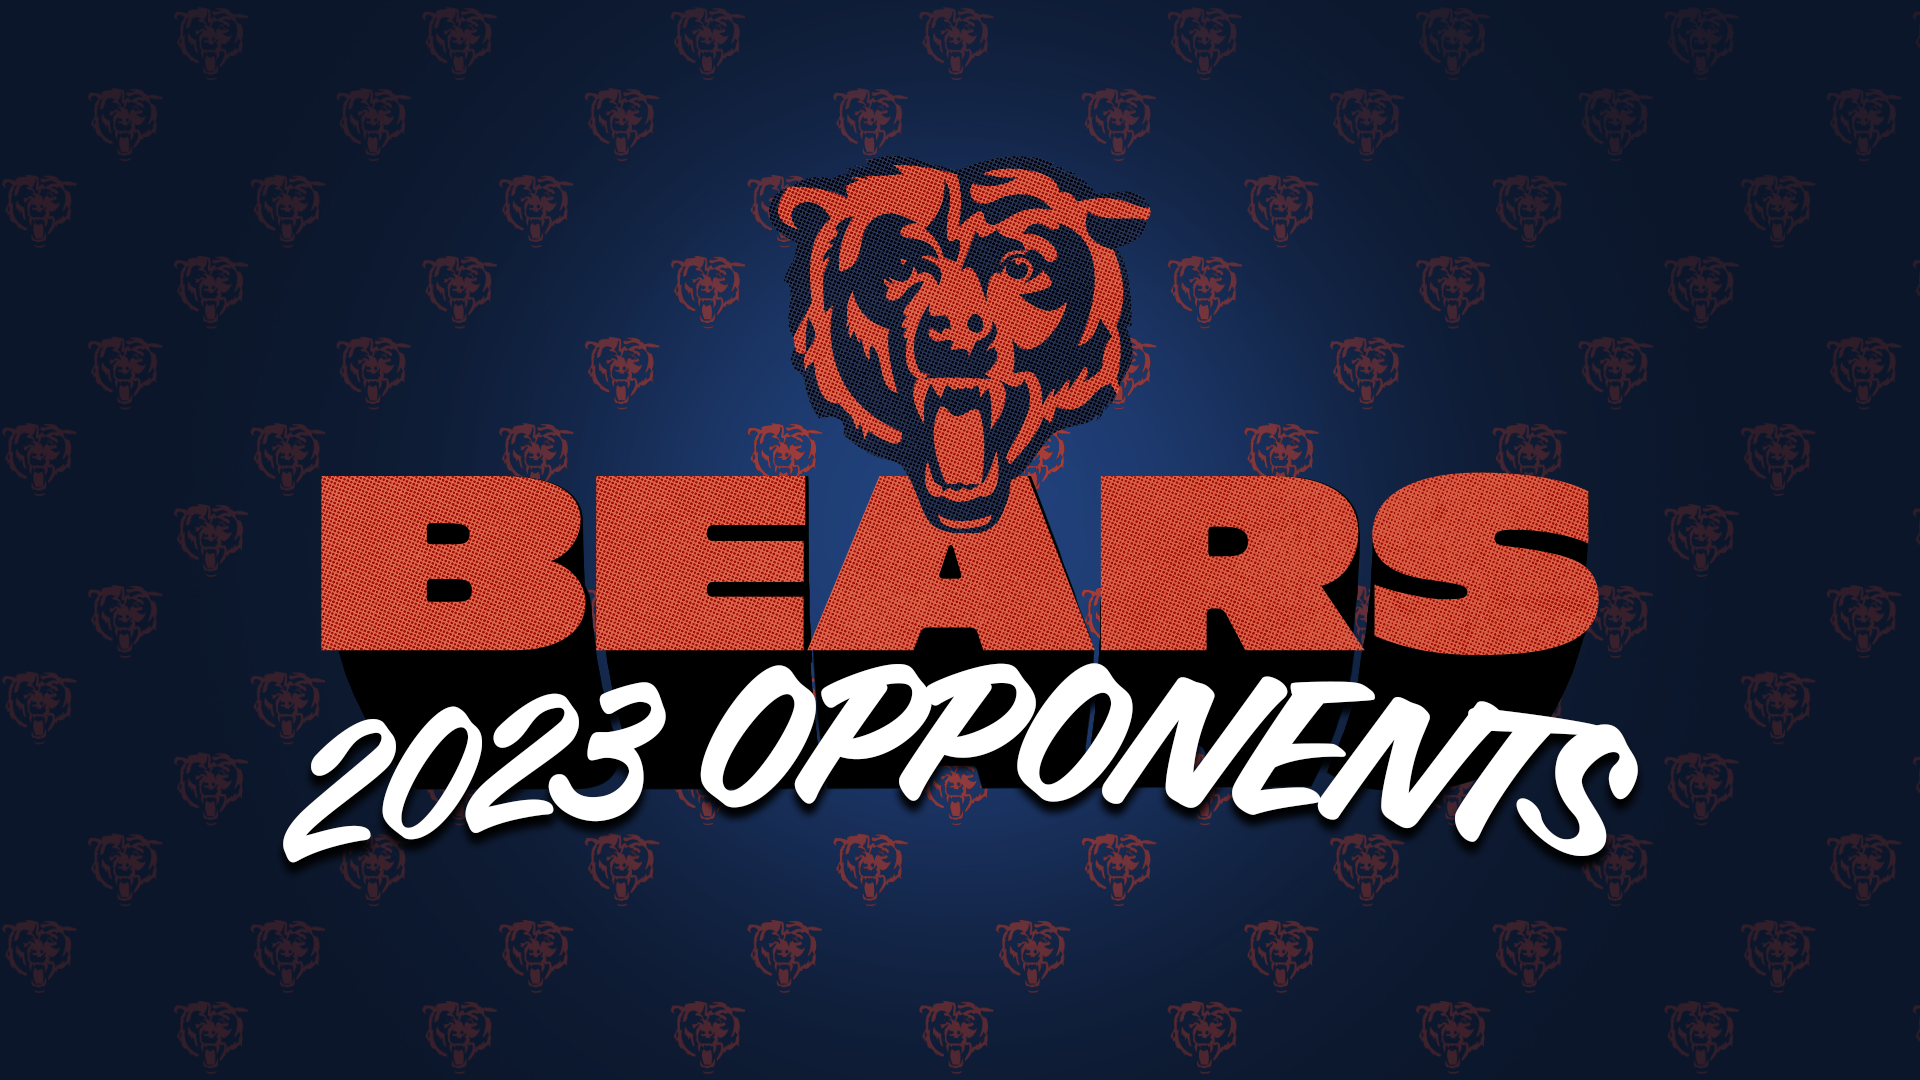 Bears schedule A look at Chicago’s 2023 opponents